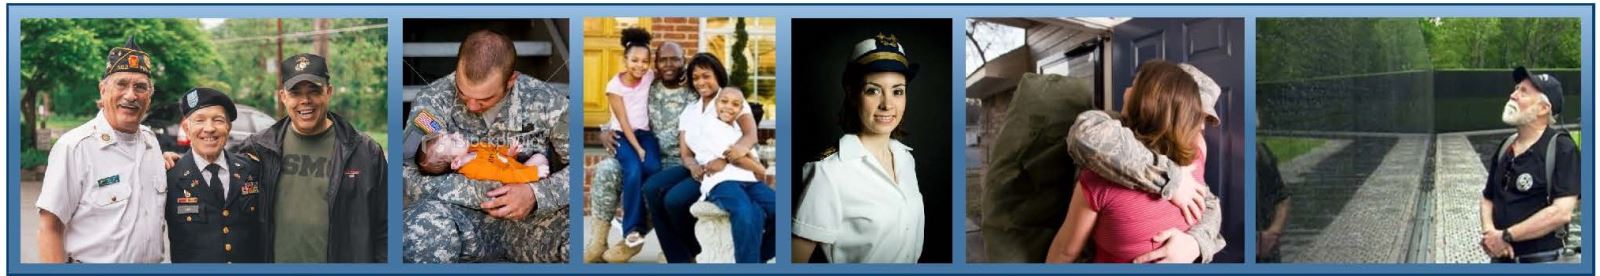 Photos of Veterans and service members in military uniforms and attire